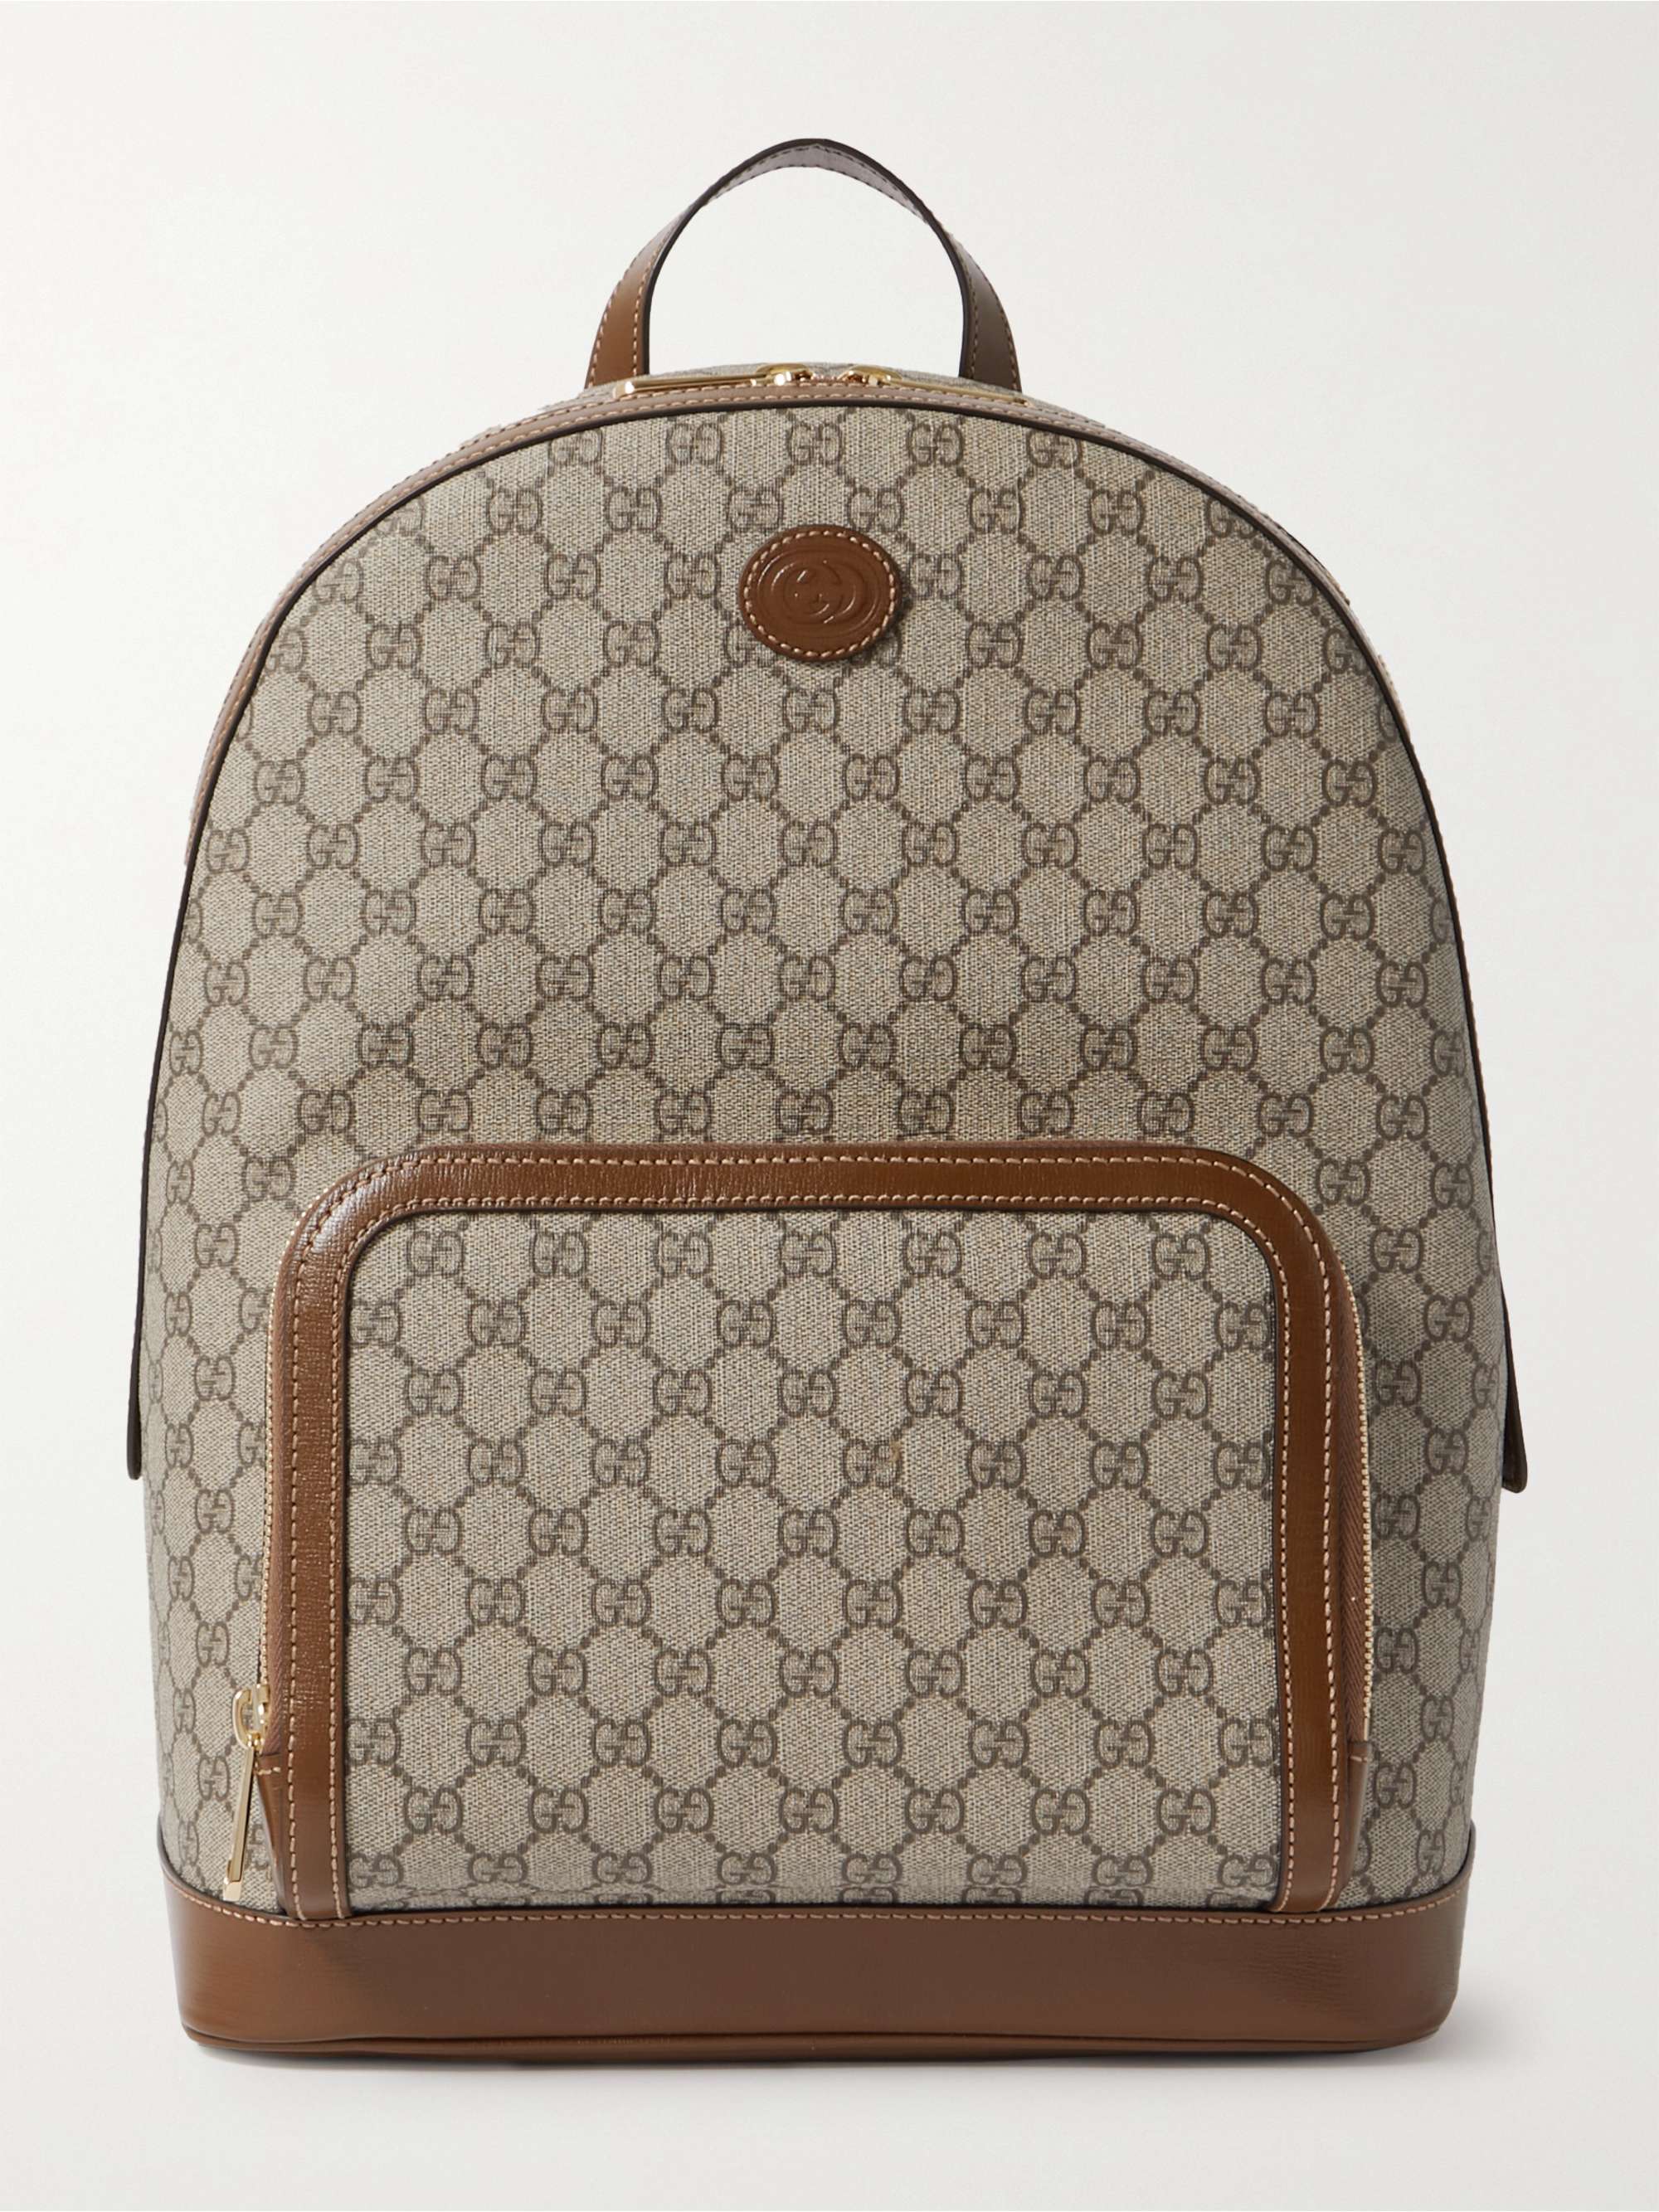 GUCCI GG Retro Leather-Trimmed Monogrammed Coated-Canvas Backpack